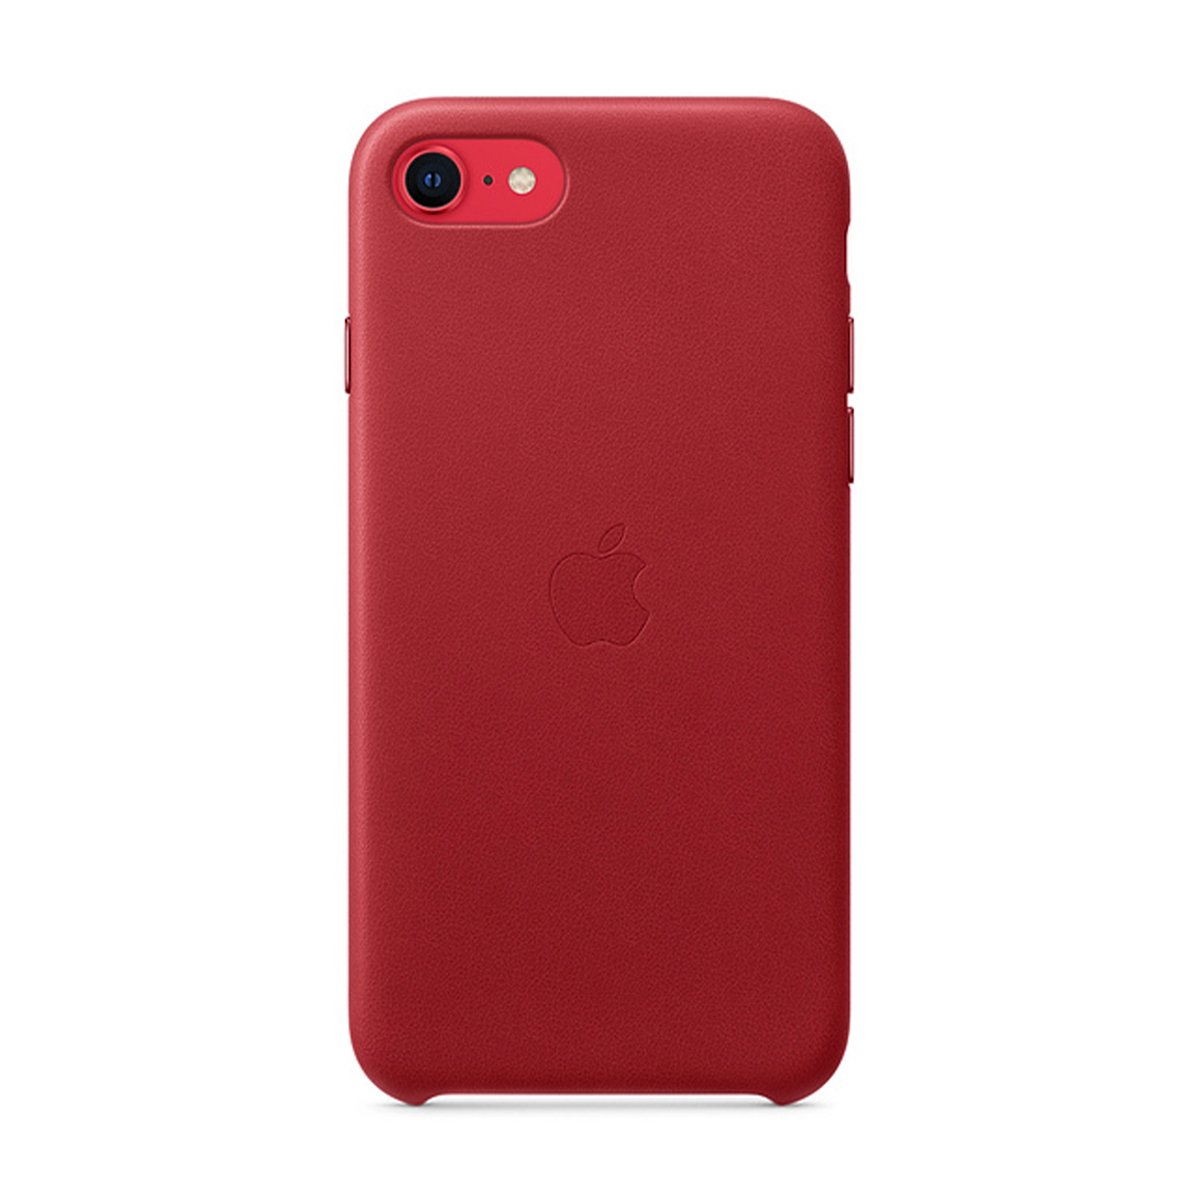 iPhone SE Leather Case - (PRODUCT)RED